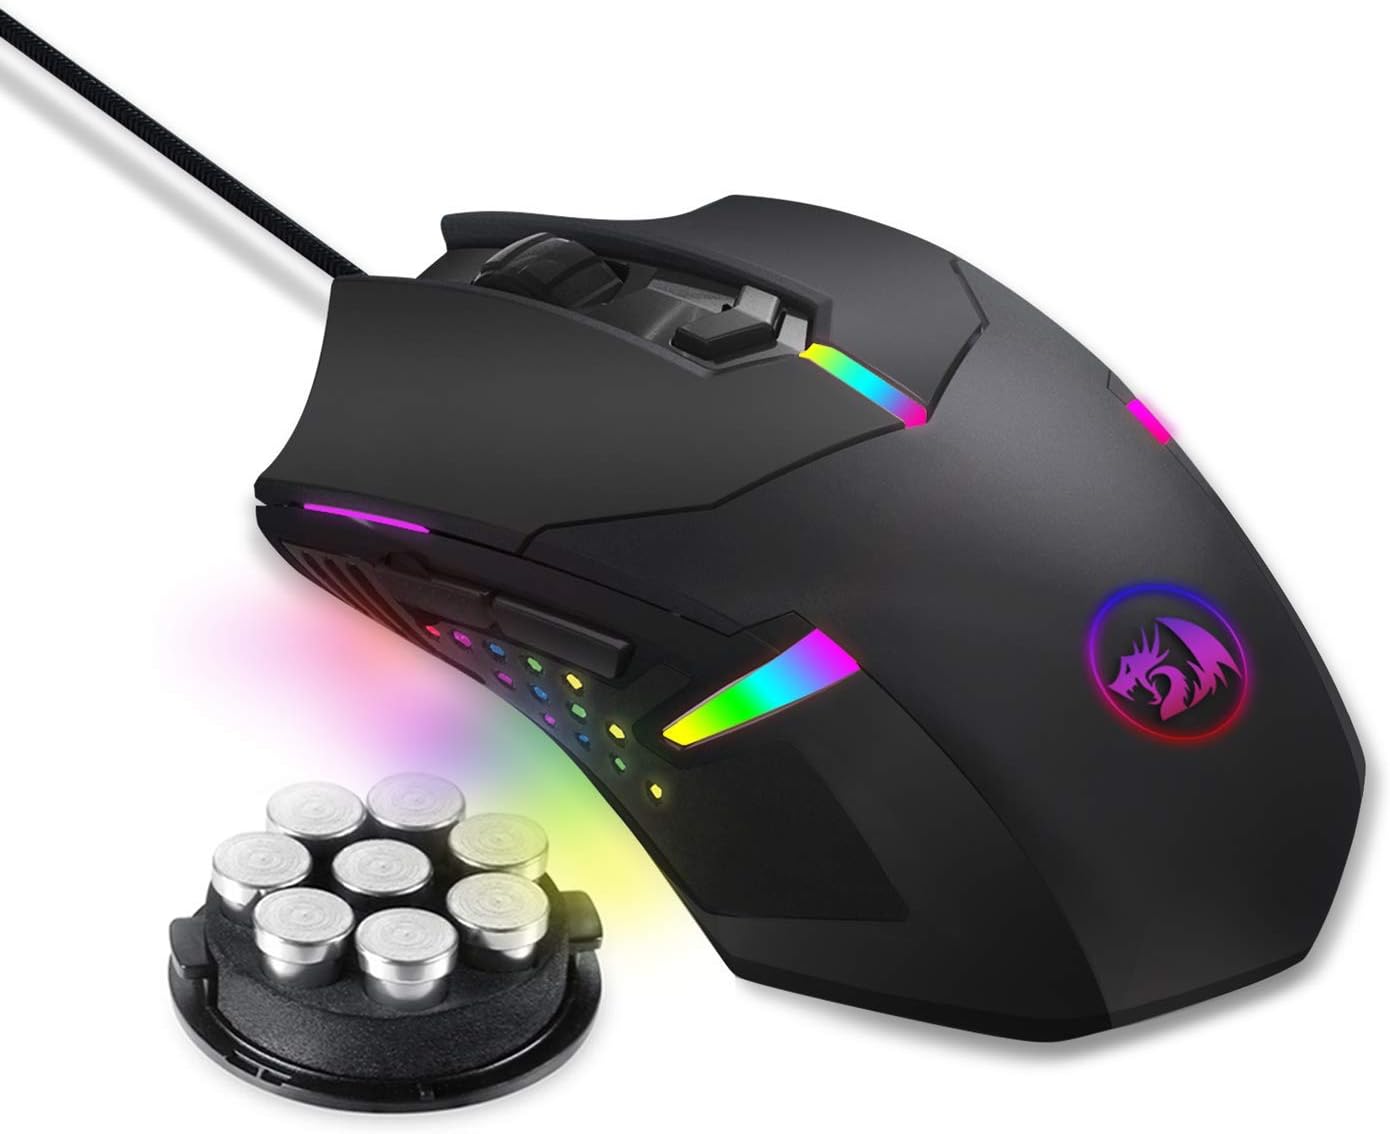 Redragon Gaming Mouse, Wired Gaming Mouse with RGB Backlit, 8000 DPI Adjustable, Mouse with 9 Programmable Macro Buttons & Fire Button, Software Supports DIY Keybinds, M910-K